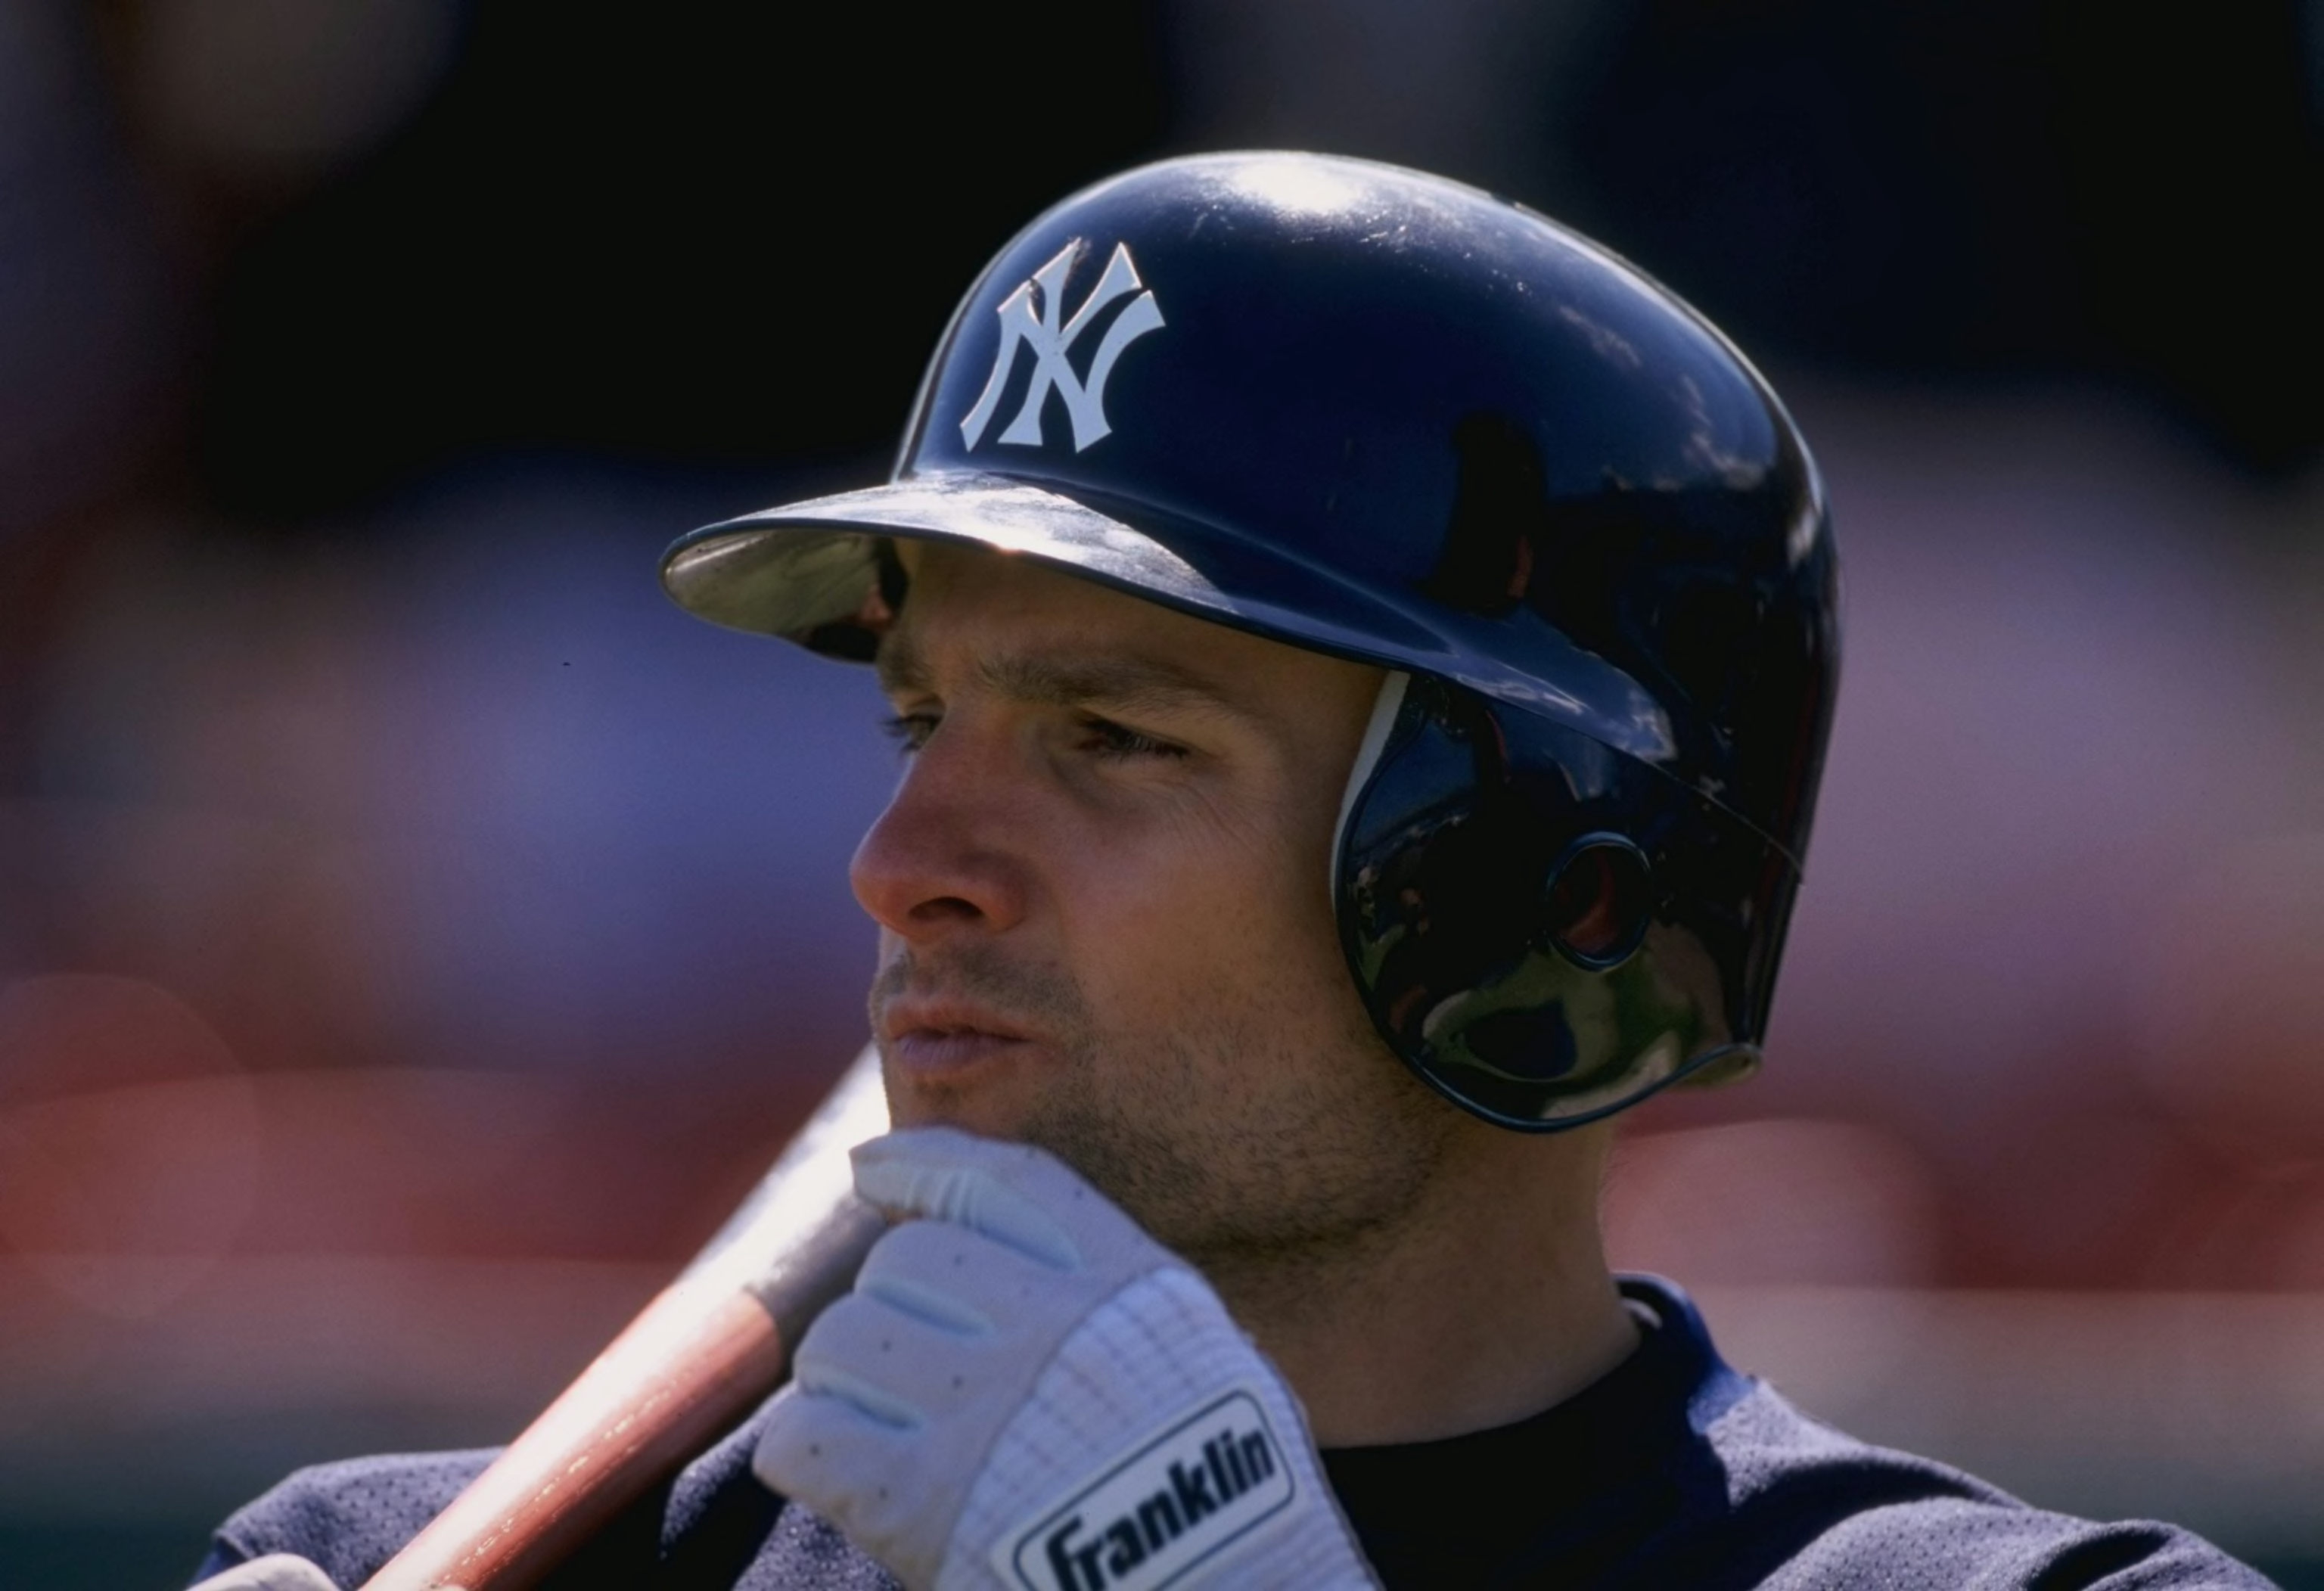 Today in Aggie History, July 7: A&M baseball player Chuck Knoblauch was  born, Today In Aggie History